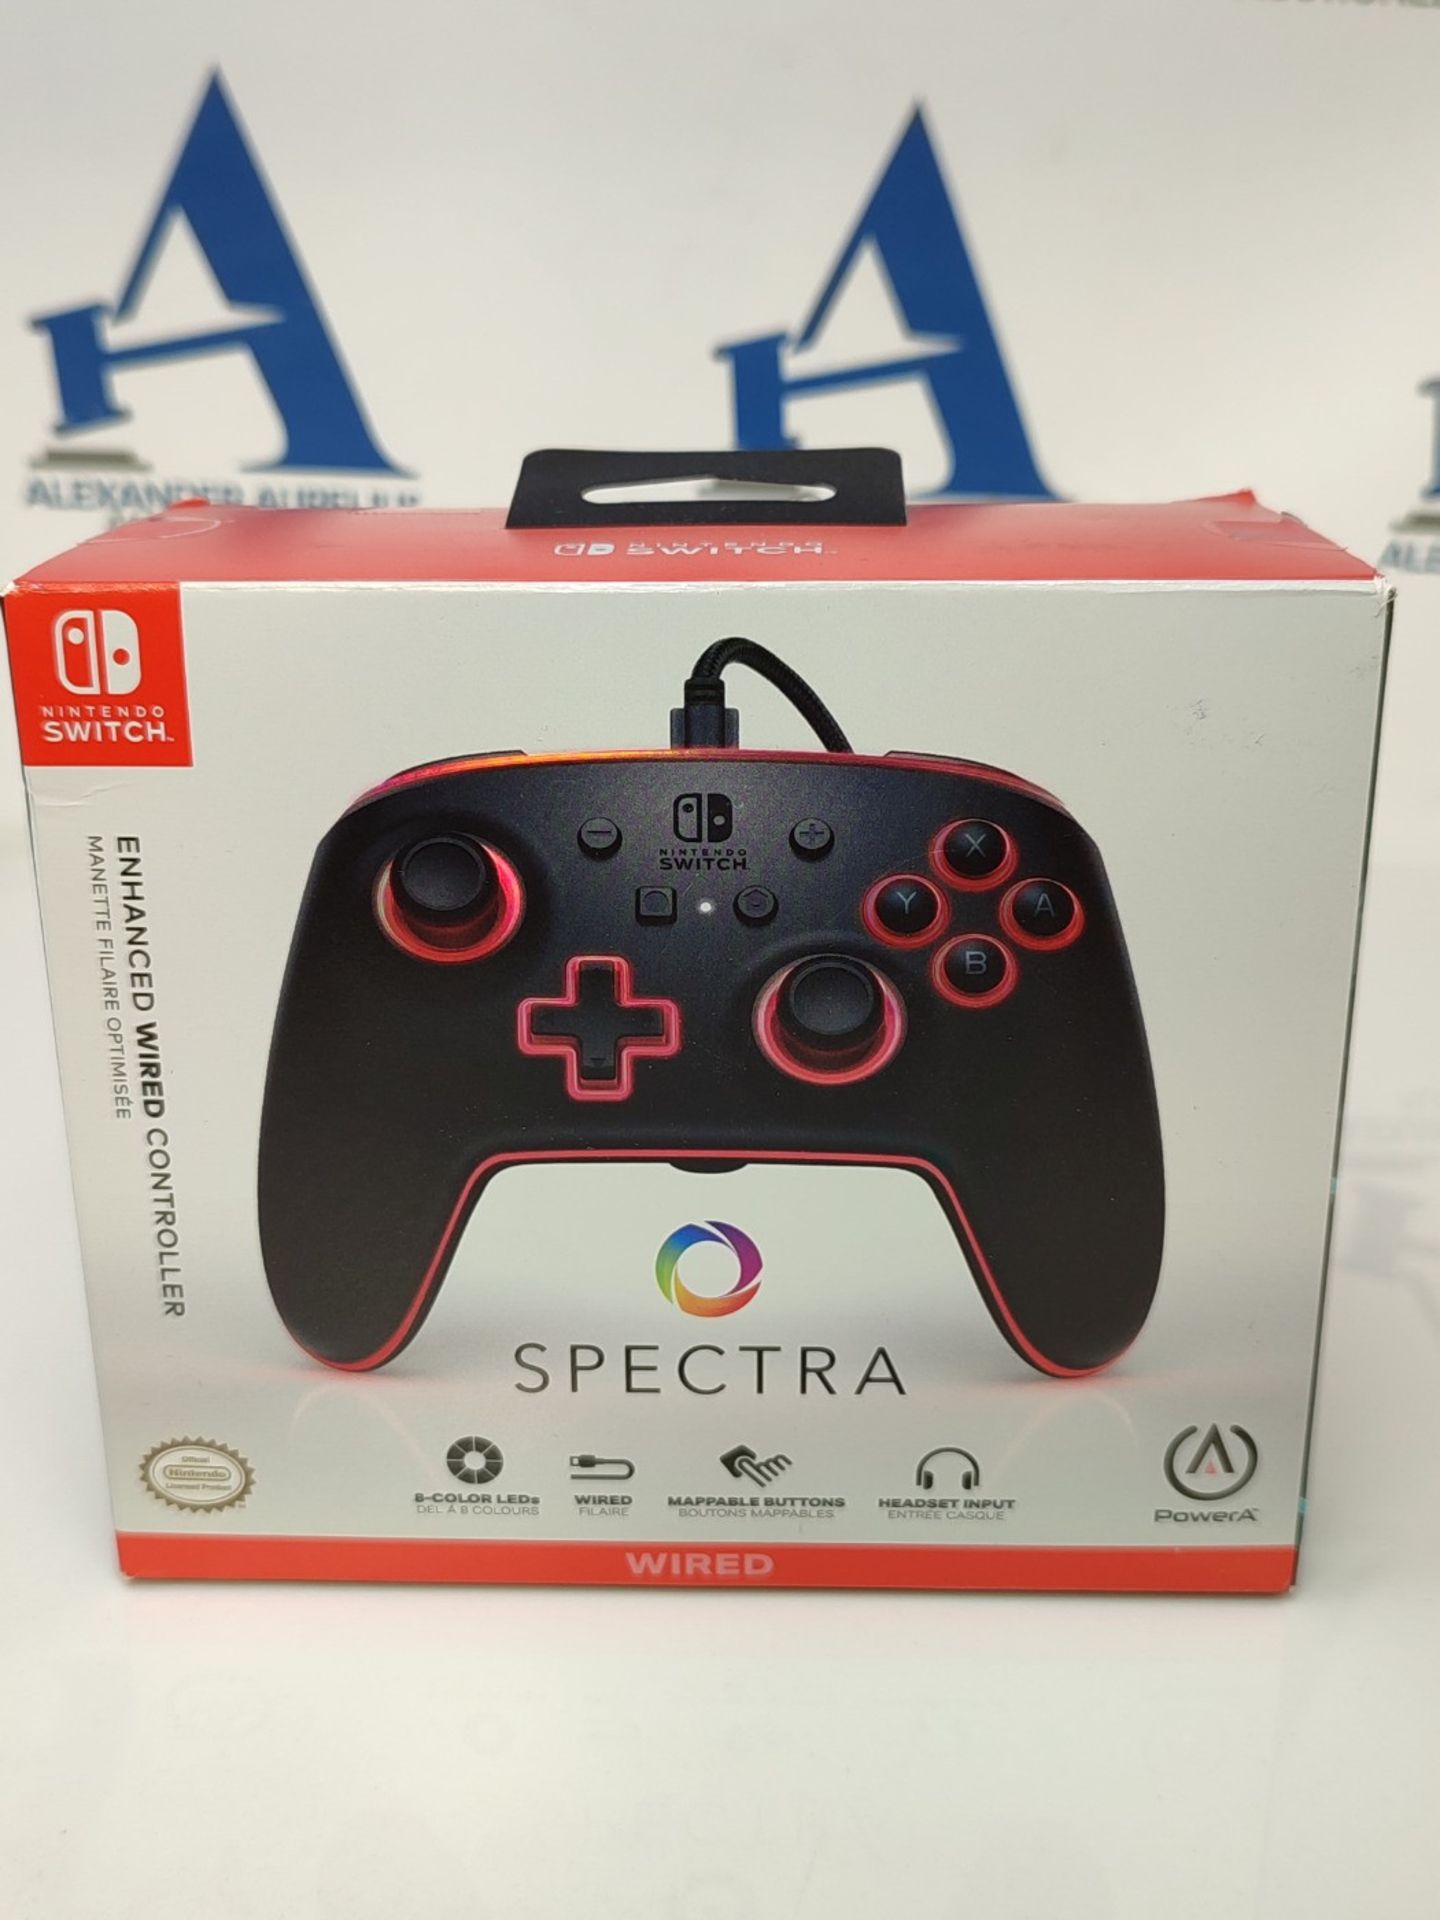 PowerA Advanced Wired Controller Spectra for Nintendo Switch - Nintendo Switch - Image 2 of 6